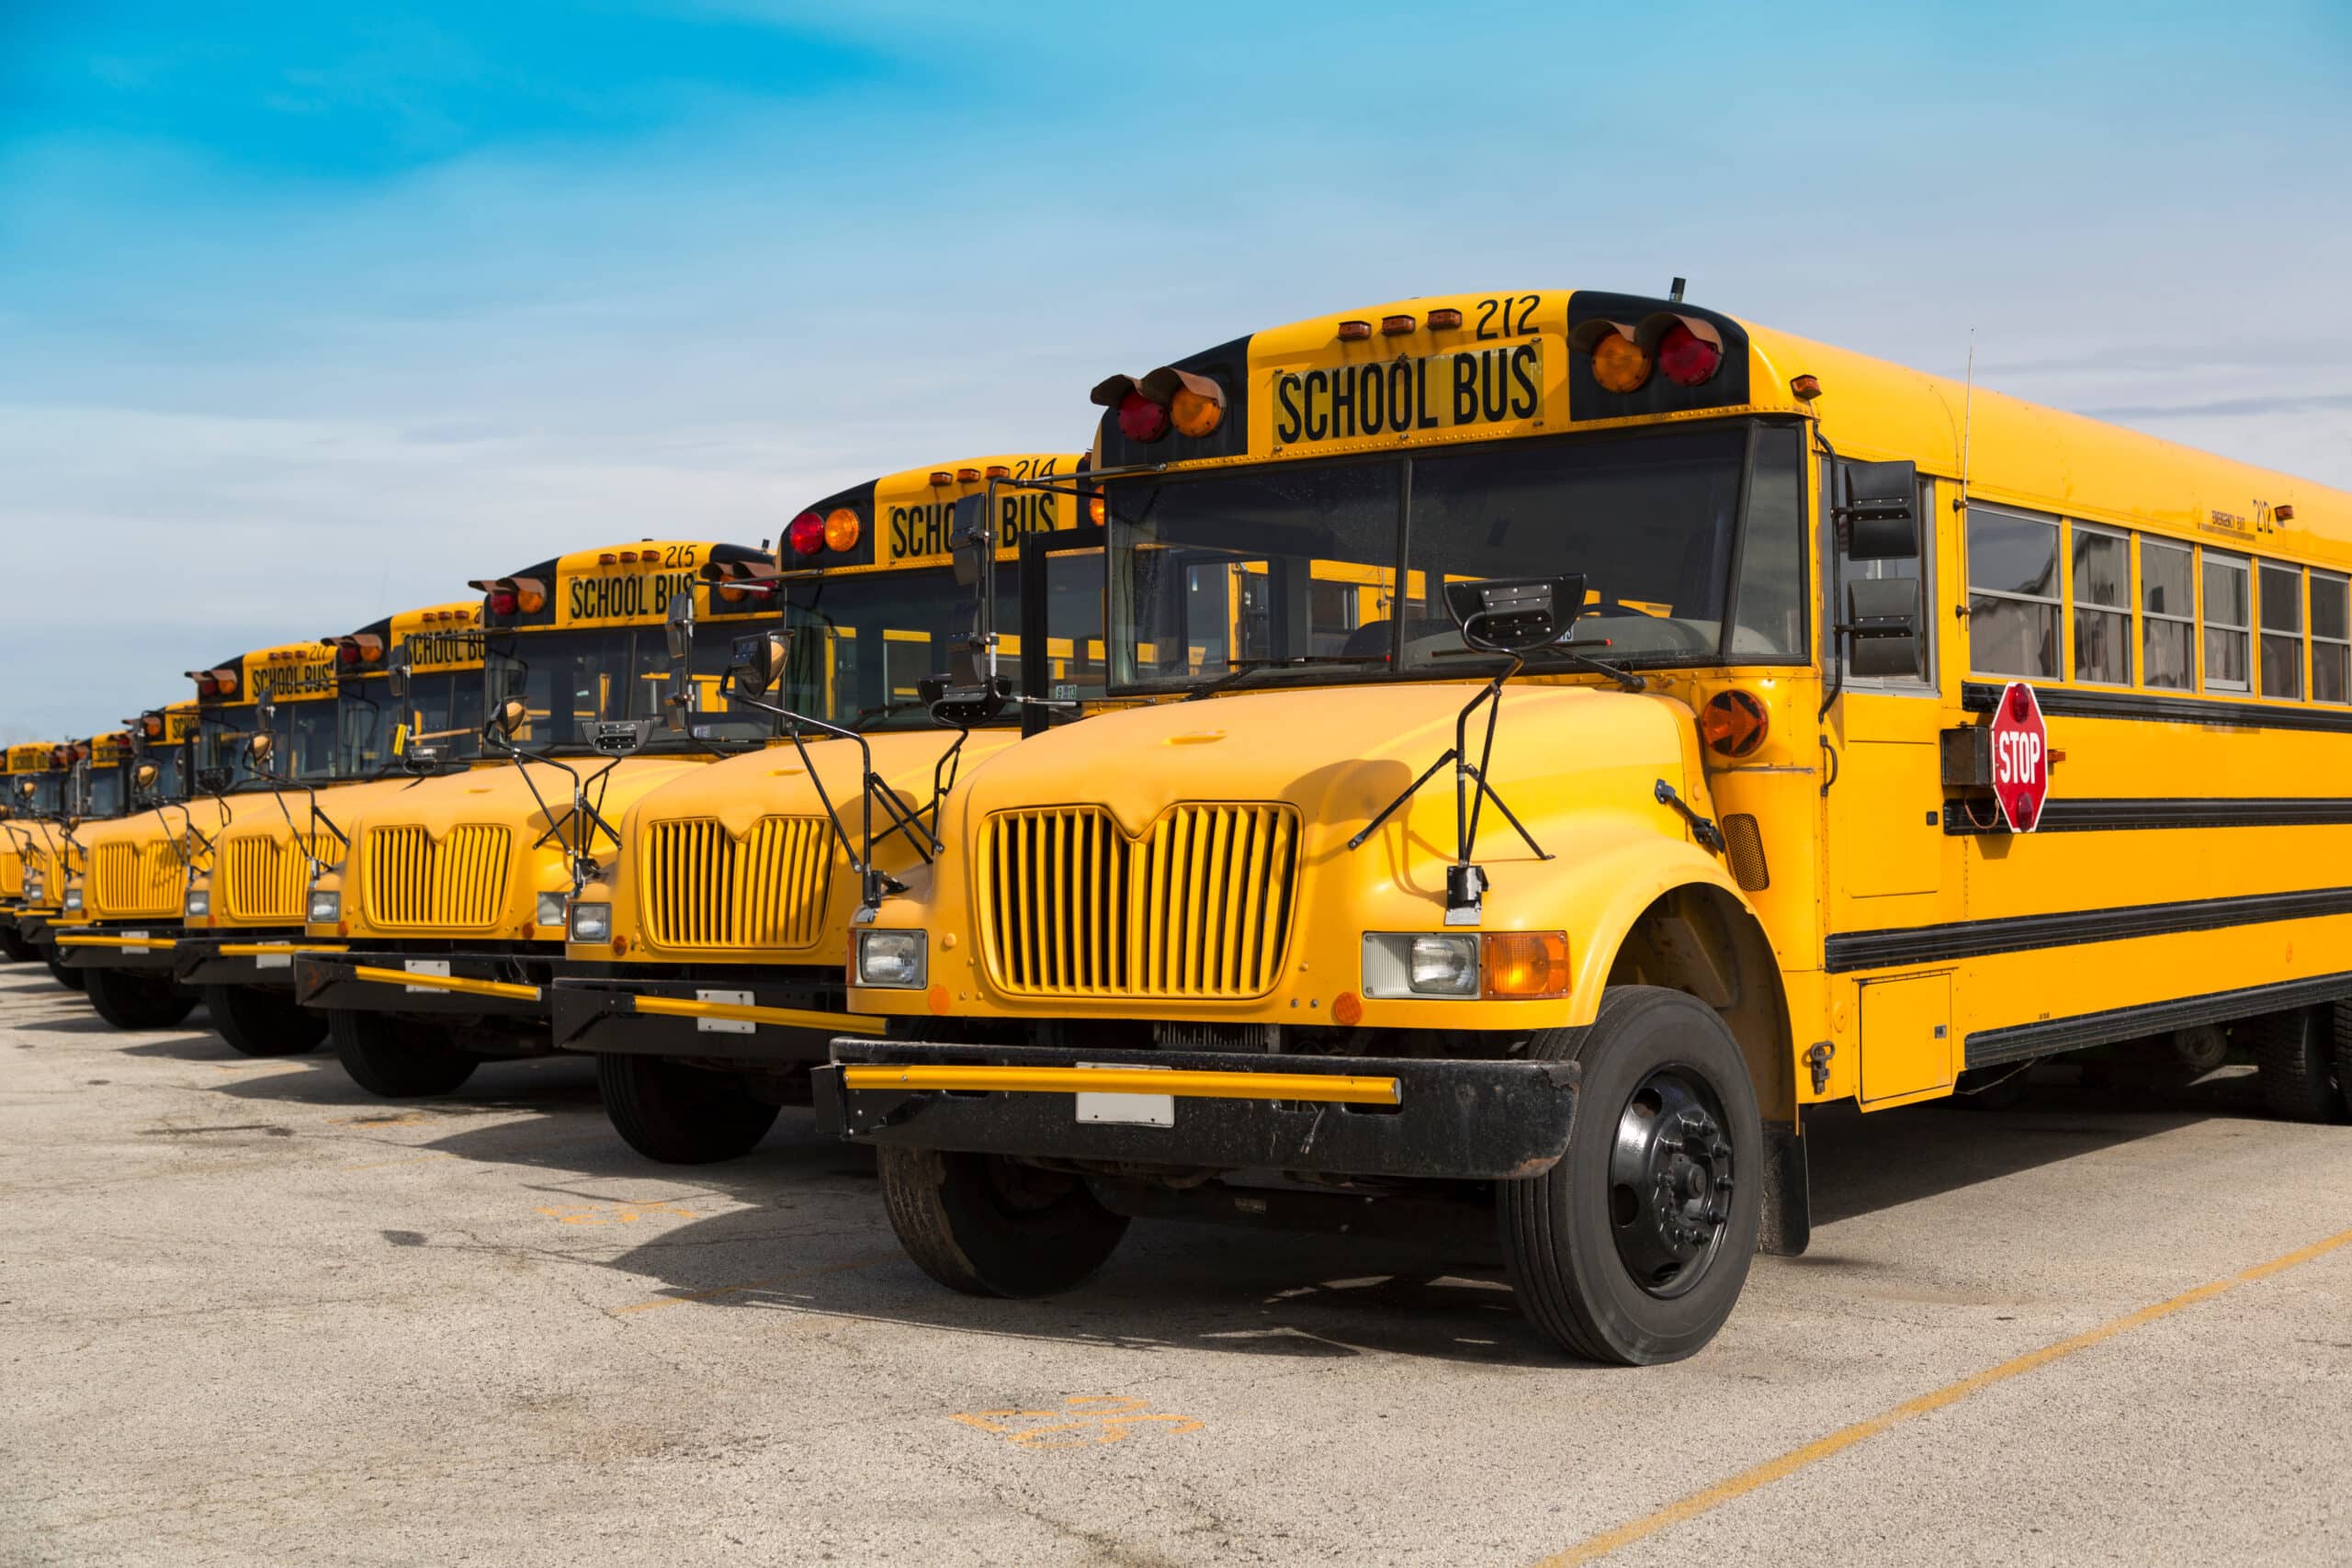 70m-coming-to-school-districts-to-purchase-electric-buses-can-it-work